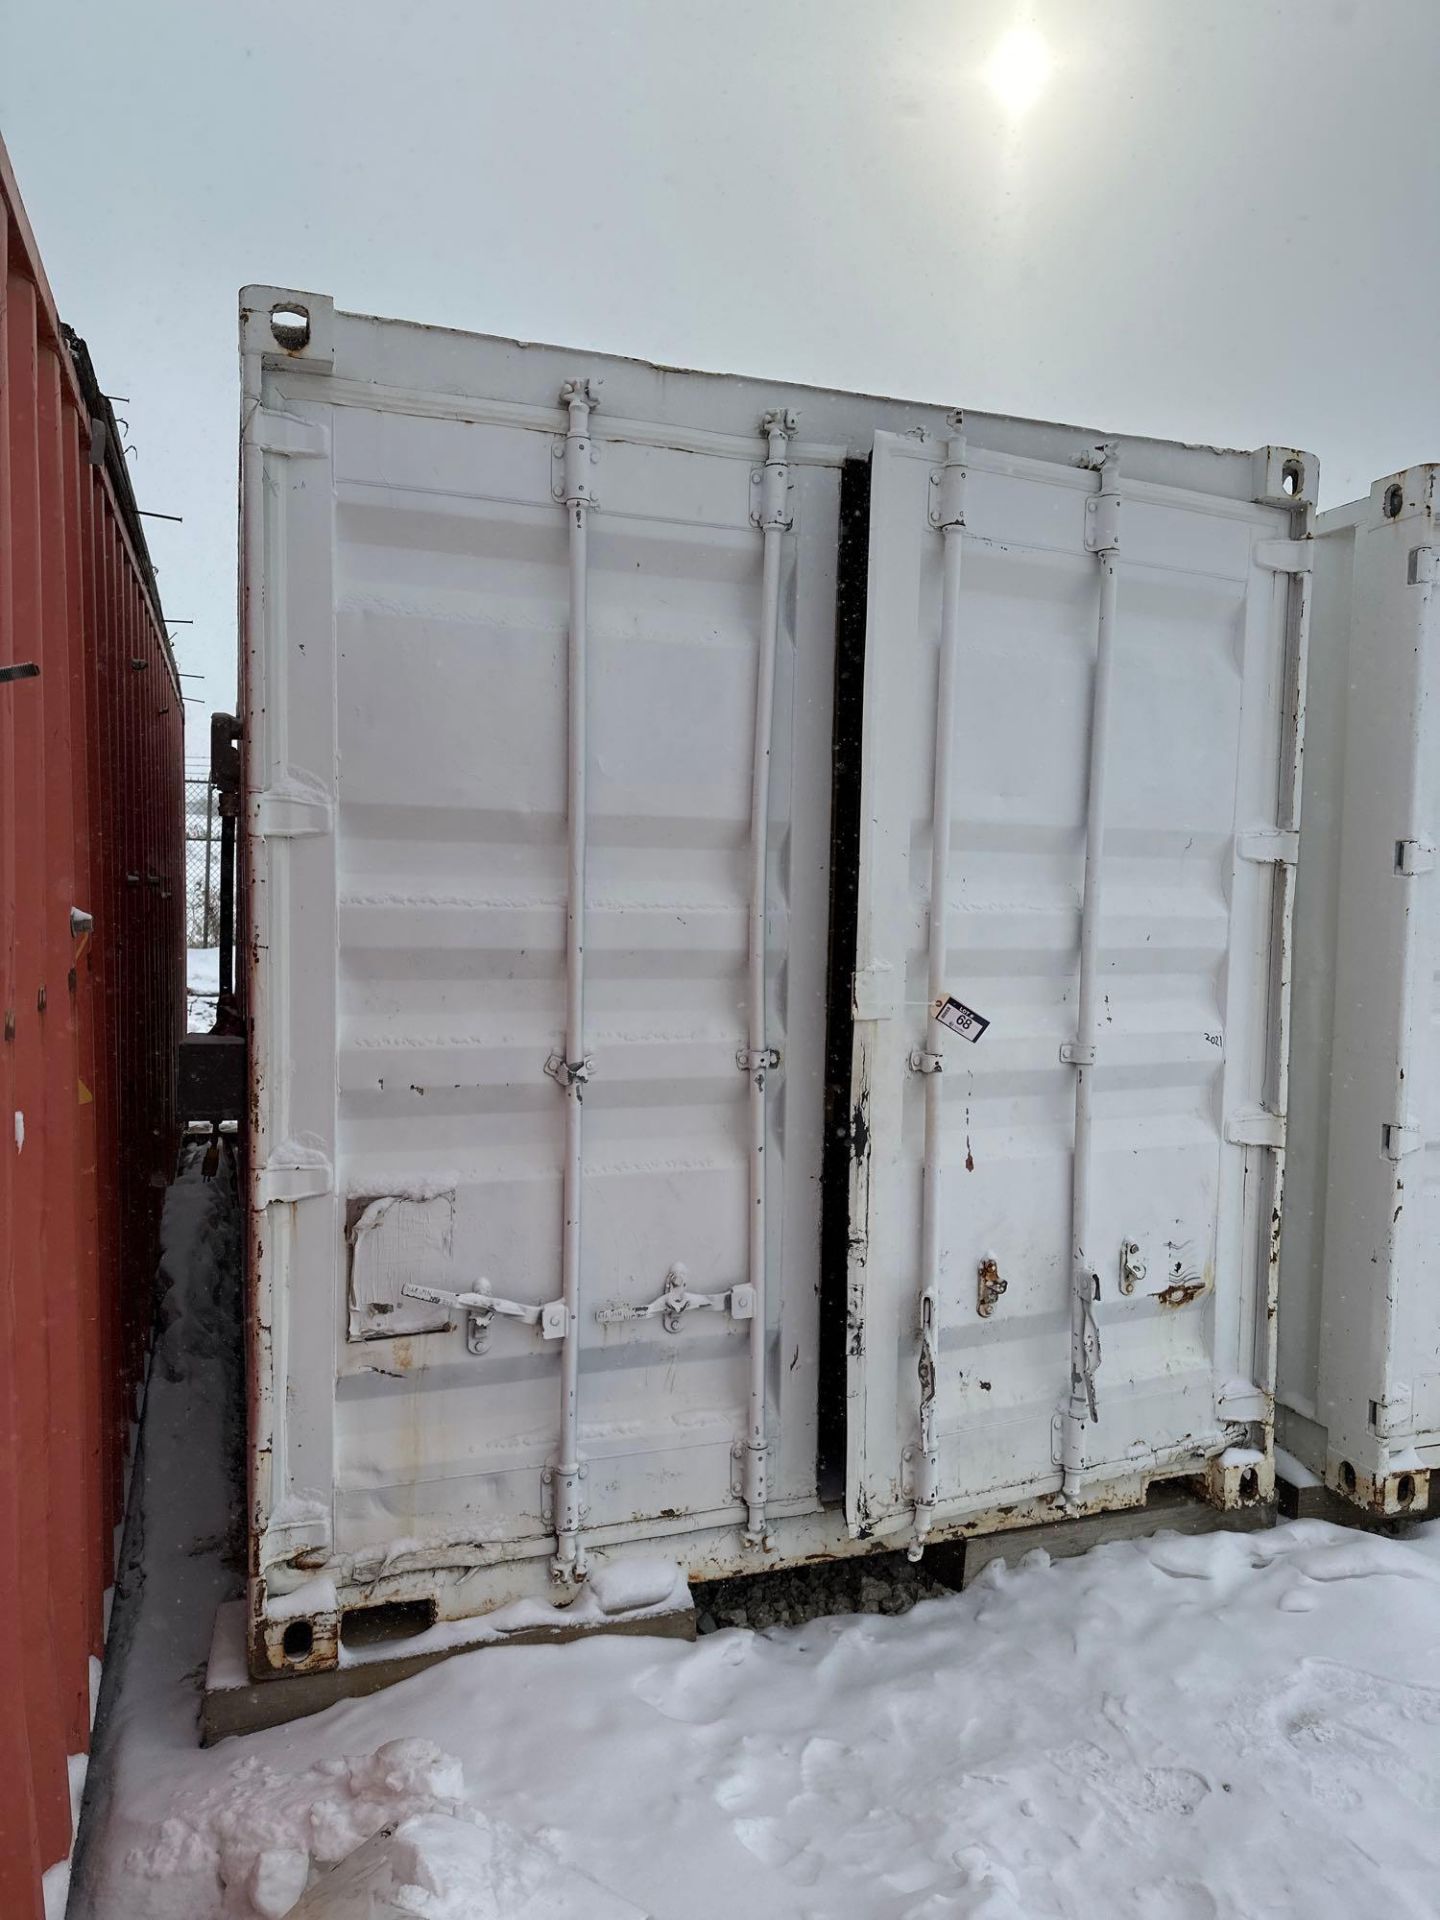 20' Sea Container w/ Shelving, Electrical, Lighting, etc. (Contents Not Included) - Image 2 of 6